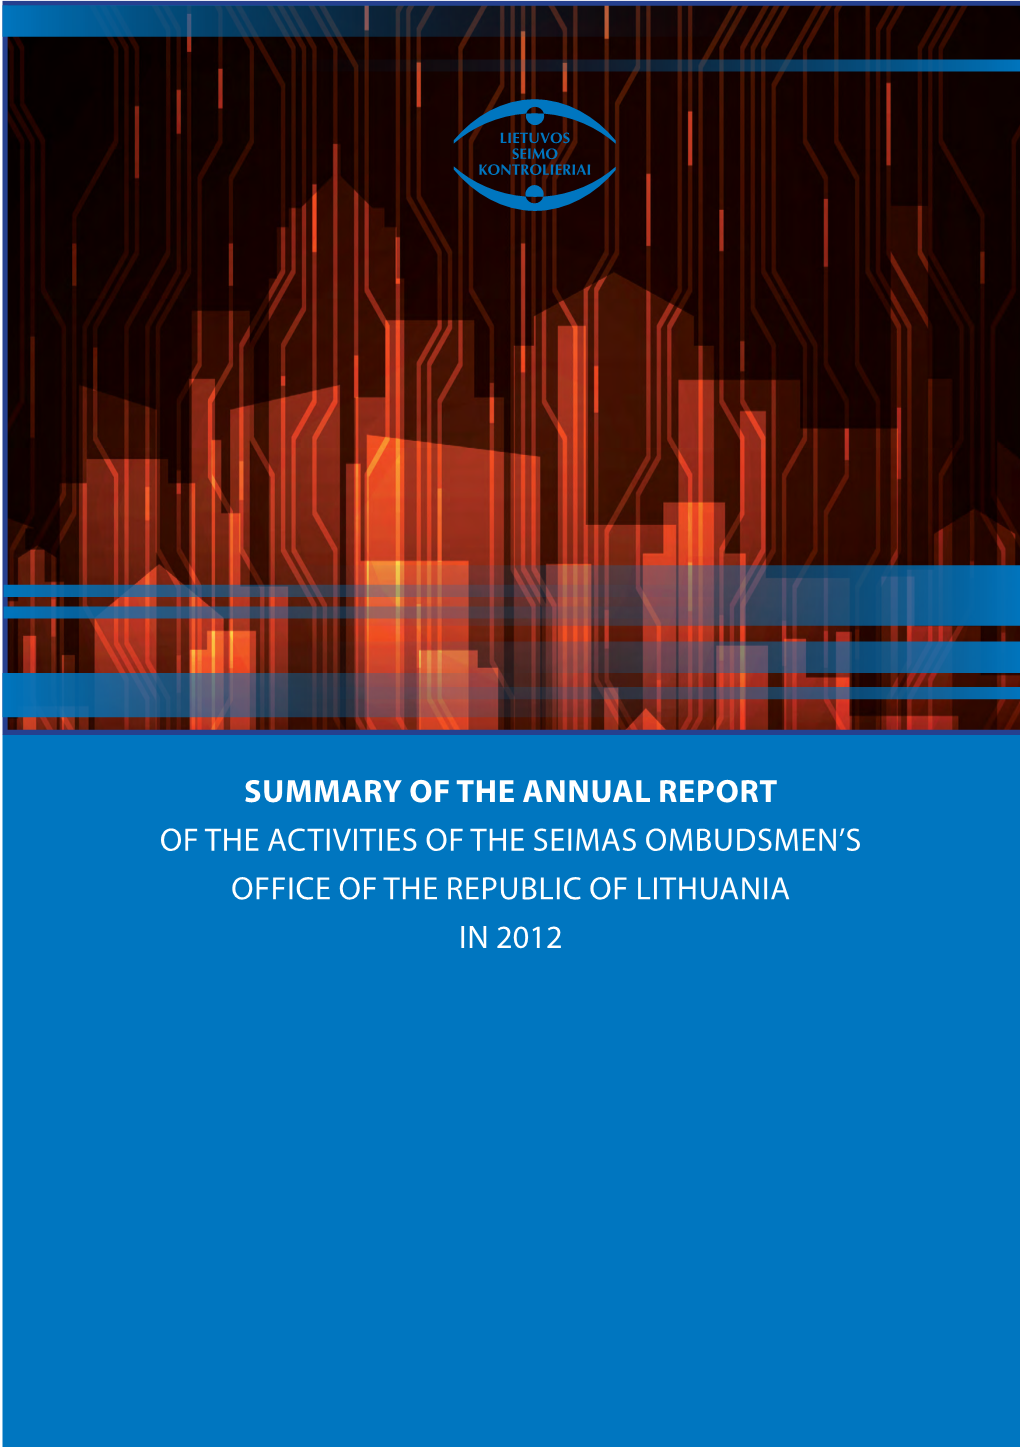 SUMMARY of the ANNUAL REPORT of the Activities of the Seimas Ombudsmen’S Office of the Republic of Lithuania in 2012 Content